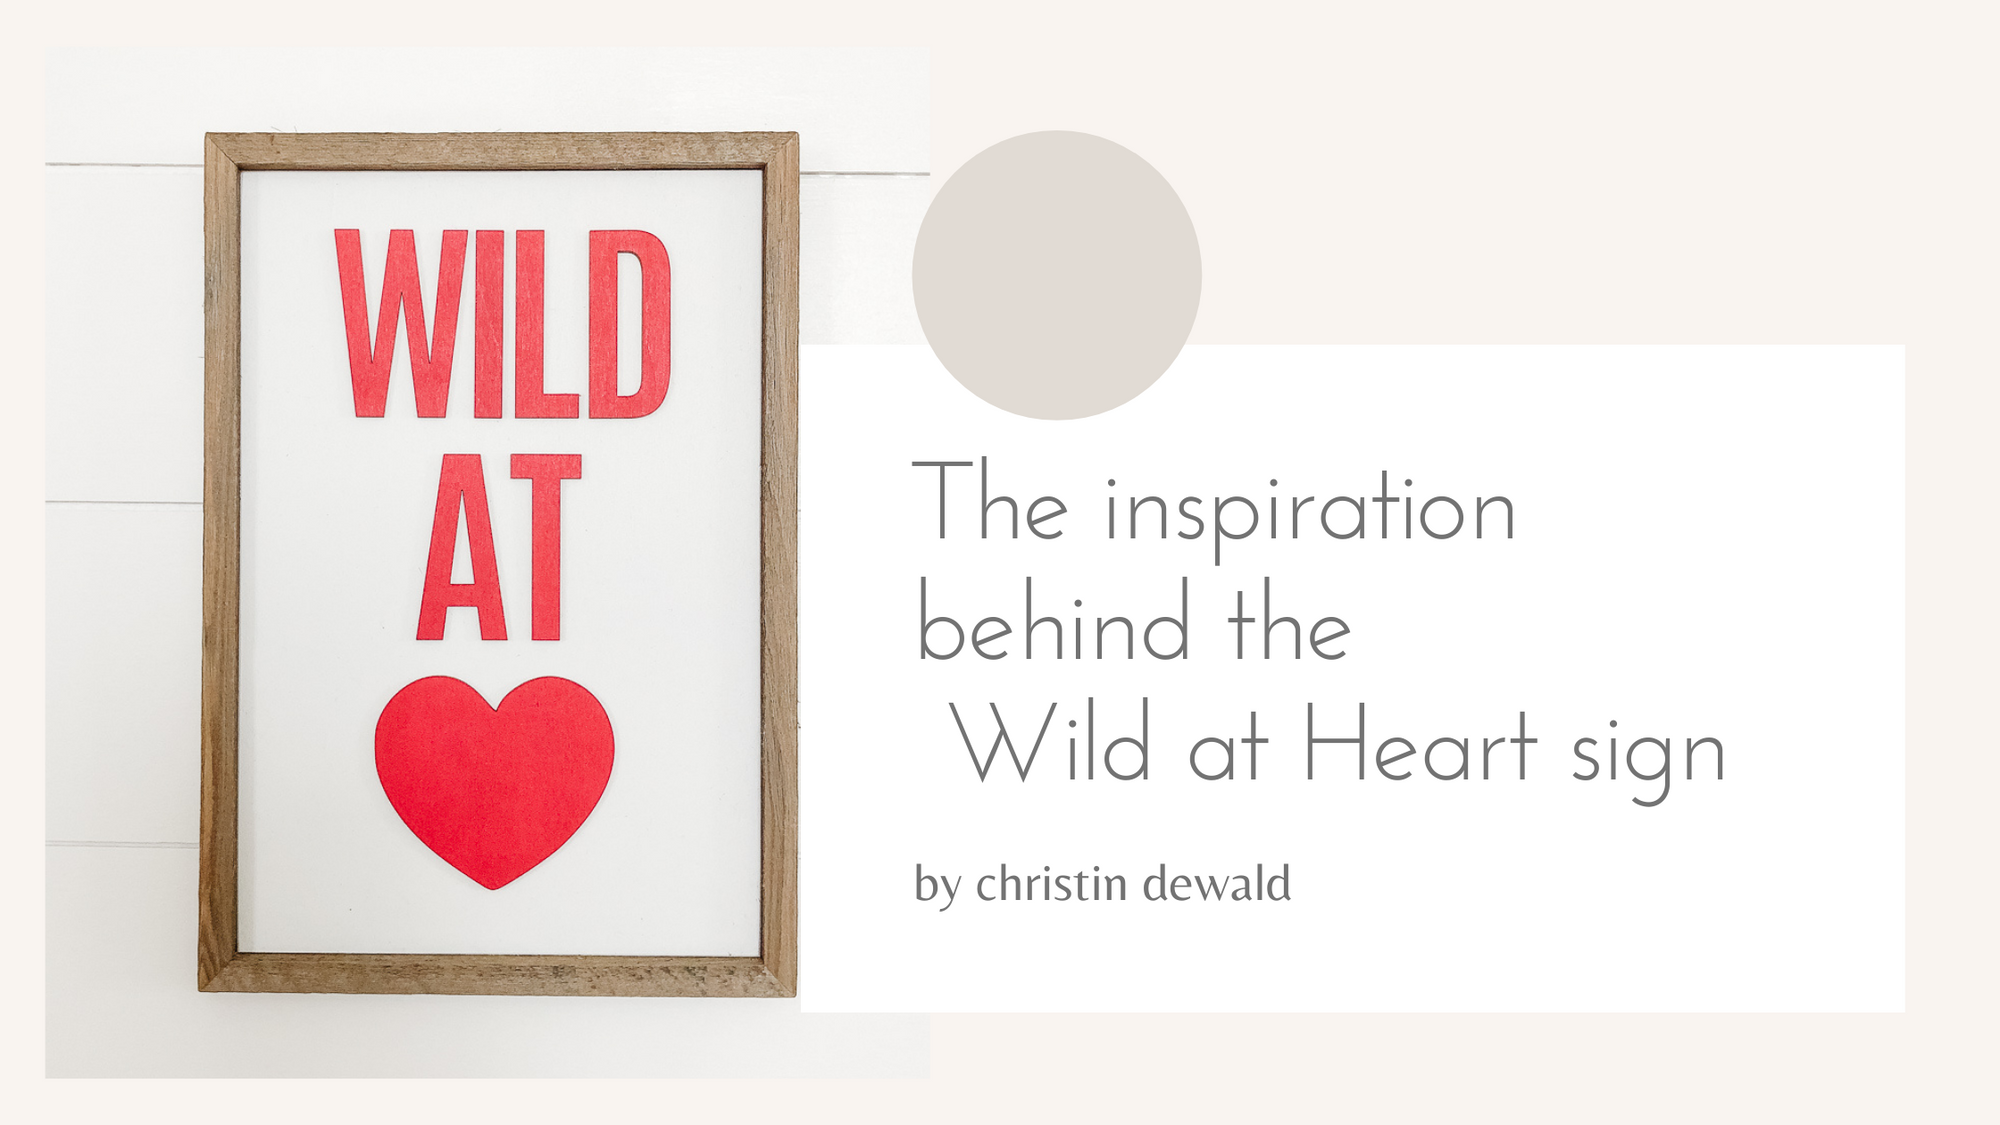 The inspiration behind the Wild at Heart sign